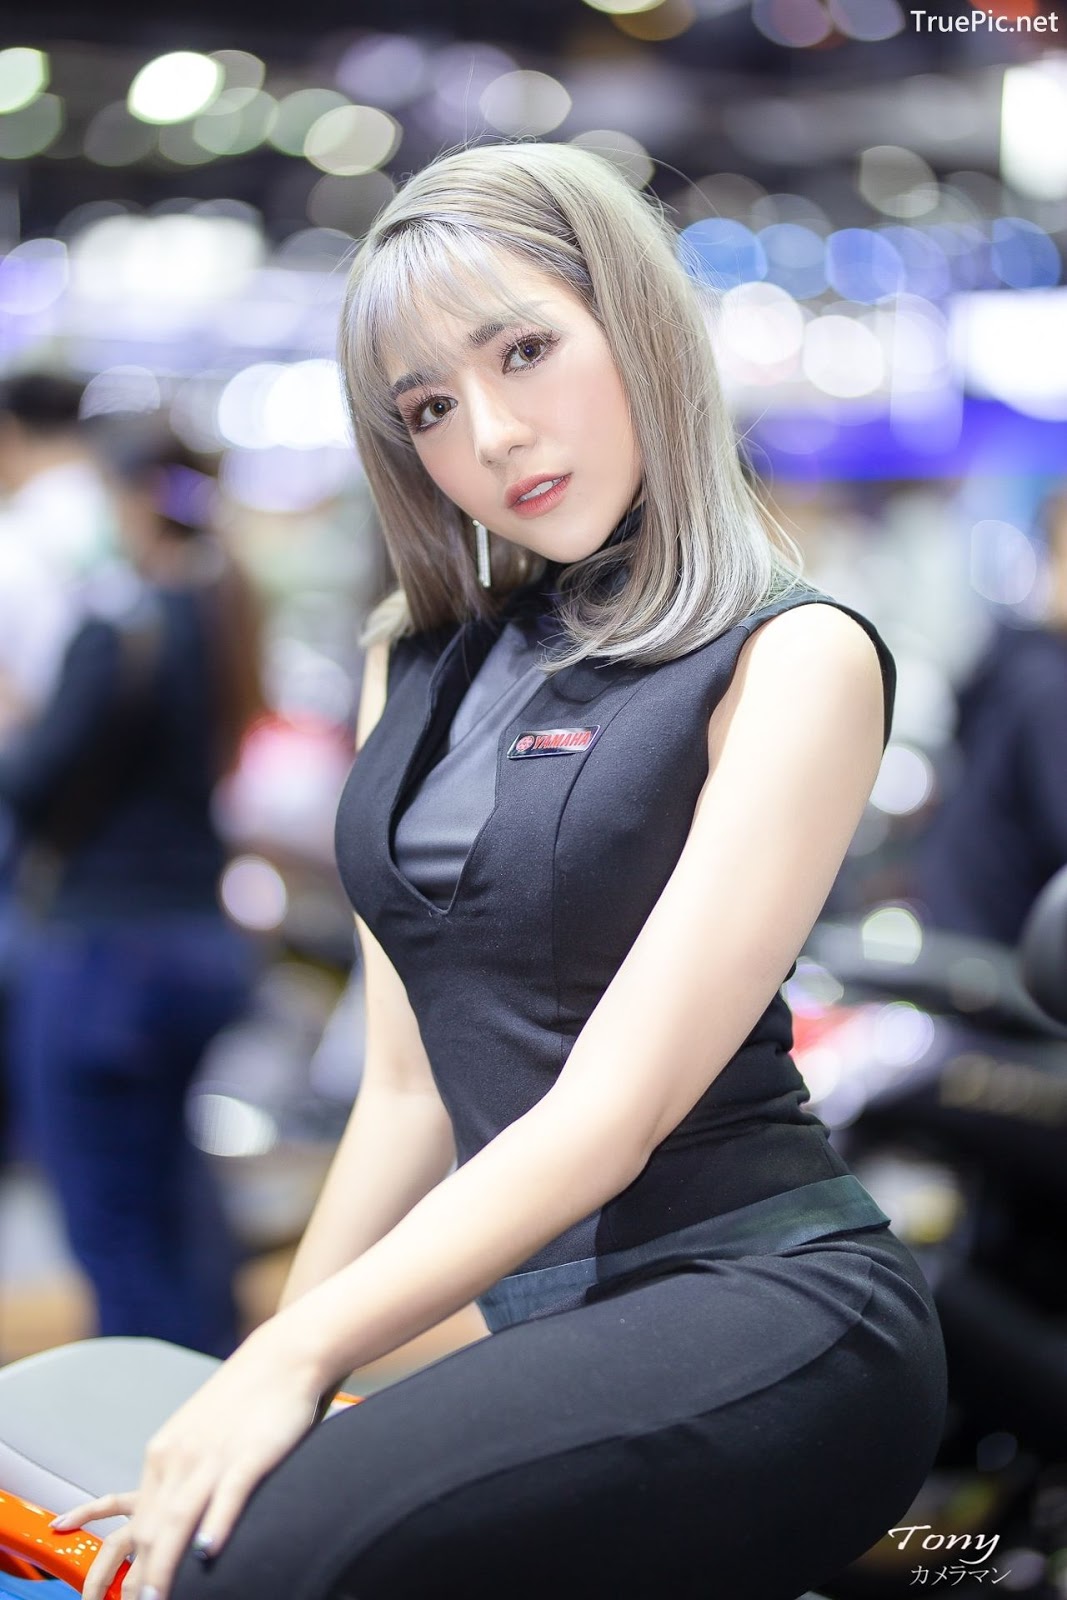 Image-Thailand-Hot-Model-Thai-Racing-Girl-At-Motor-Expo-2019-TruePic.net- Picture-118